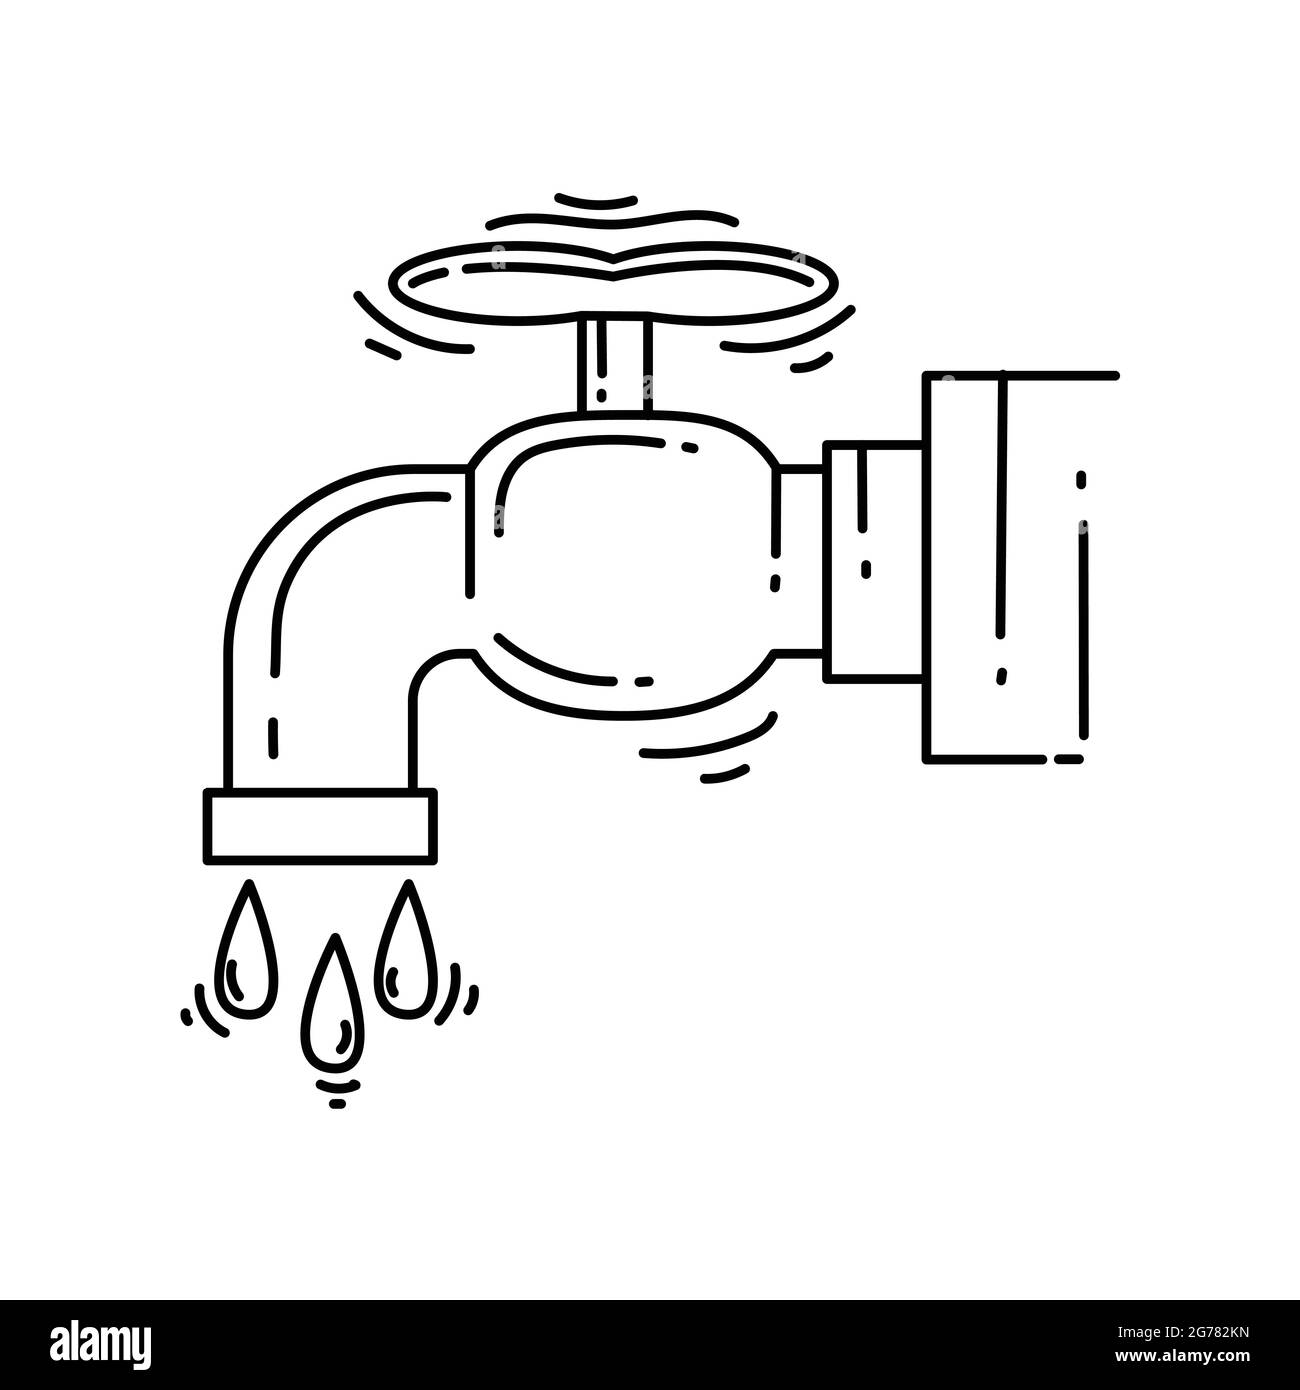 Gardening water tap hand drawn icon, outline black, doodle icon, vector icon design. Stock Vector